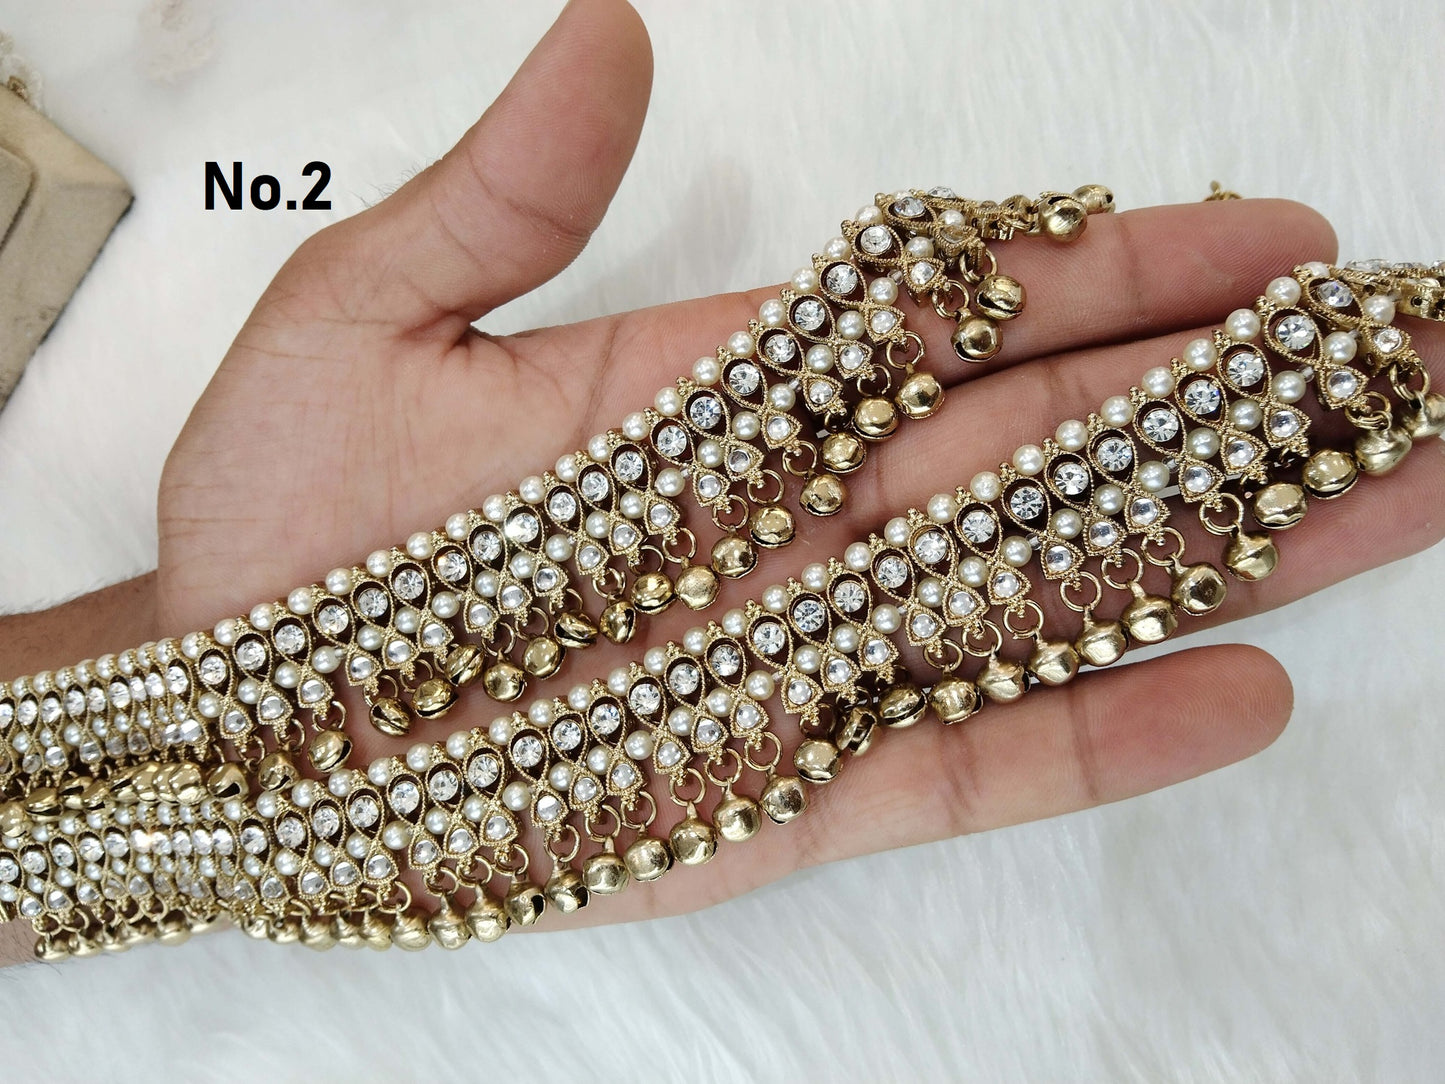 Buy Anklets Payal Foot Bracelet Indian Gold pair Anklets Foot Bracelet Payal Jhanjar Jewellery Jewellery/Traditional Bollywood Panjeb Jewellery